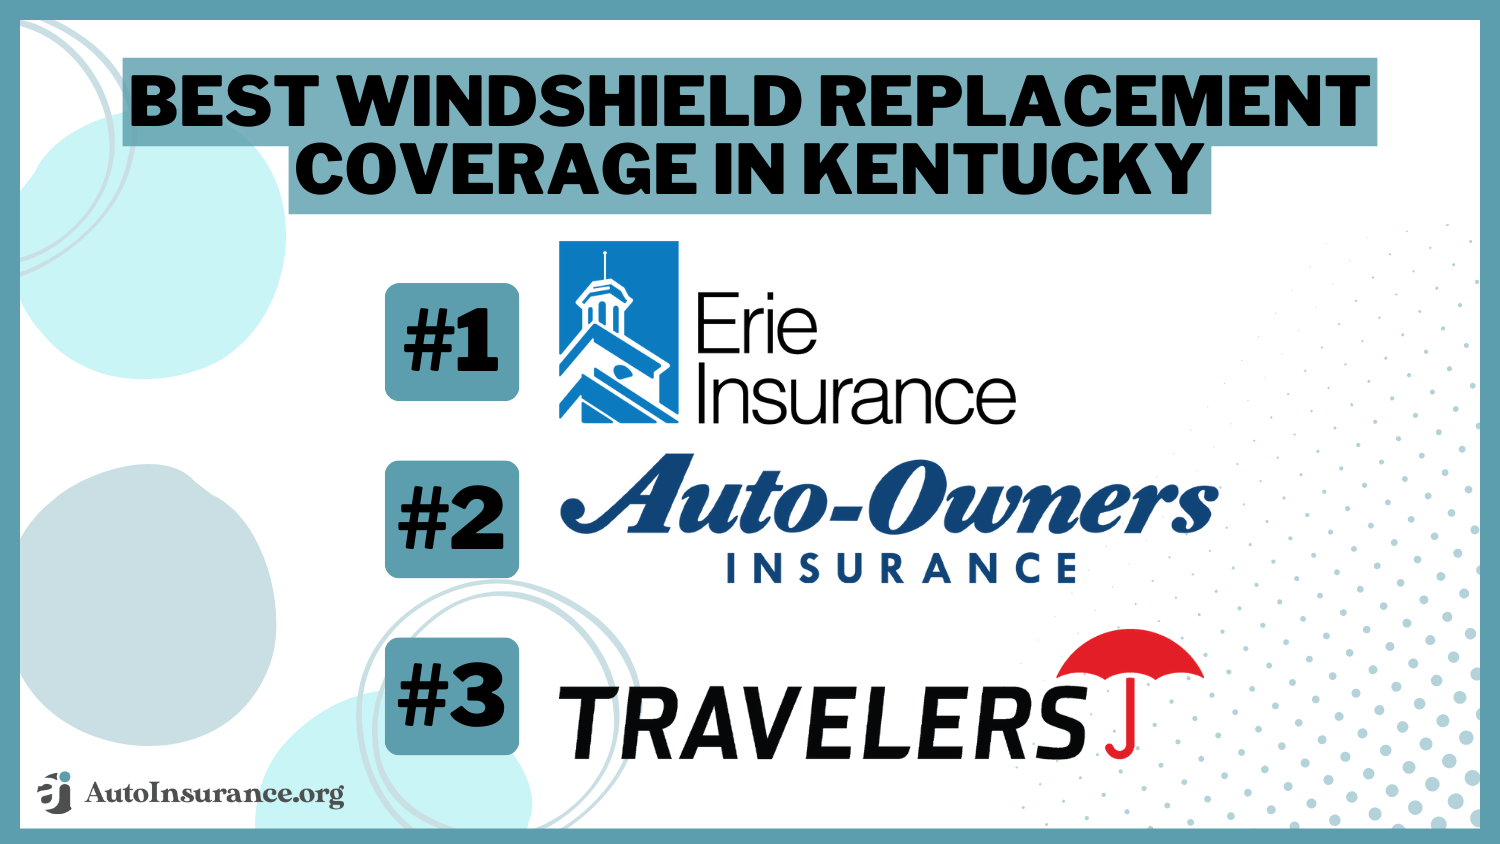 Best Windshield Replacement Coverage in Kentucky: Erie, Auto-Owners, and Travelers